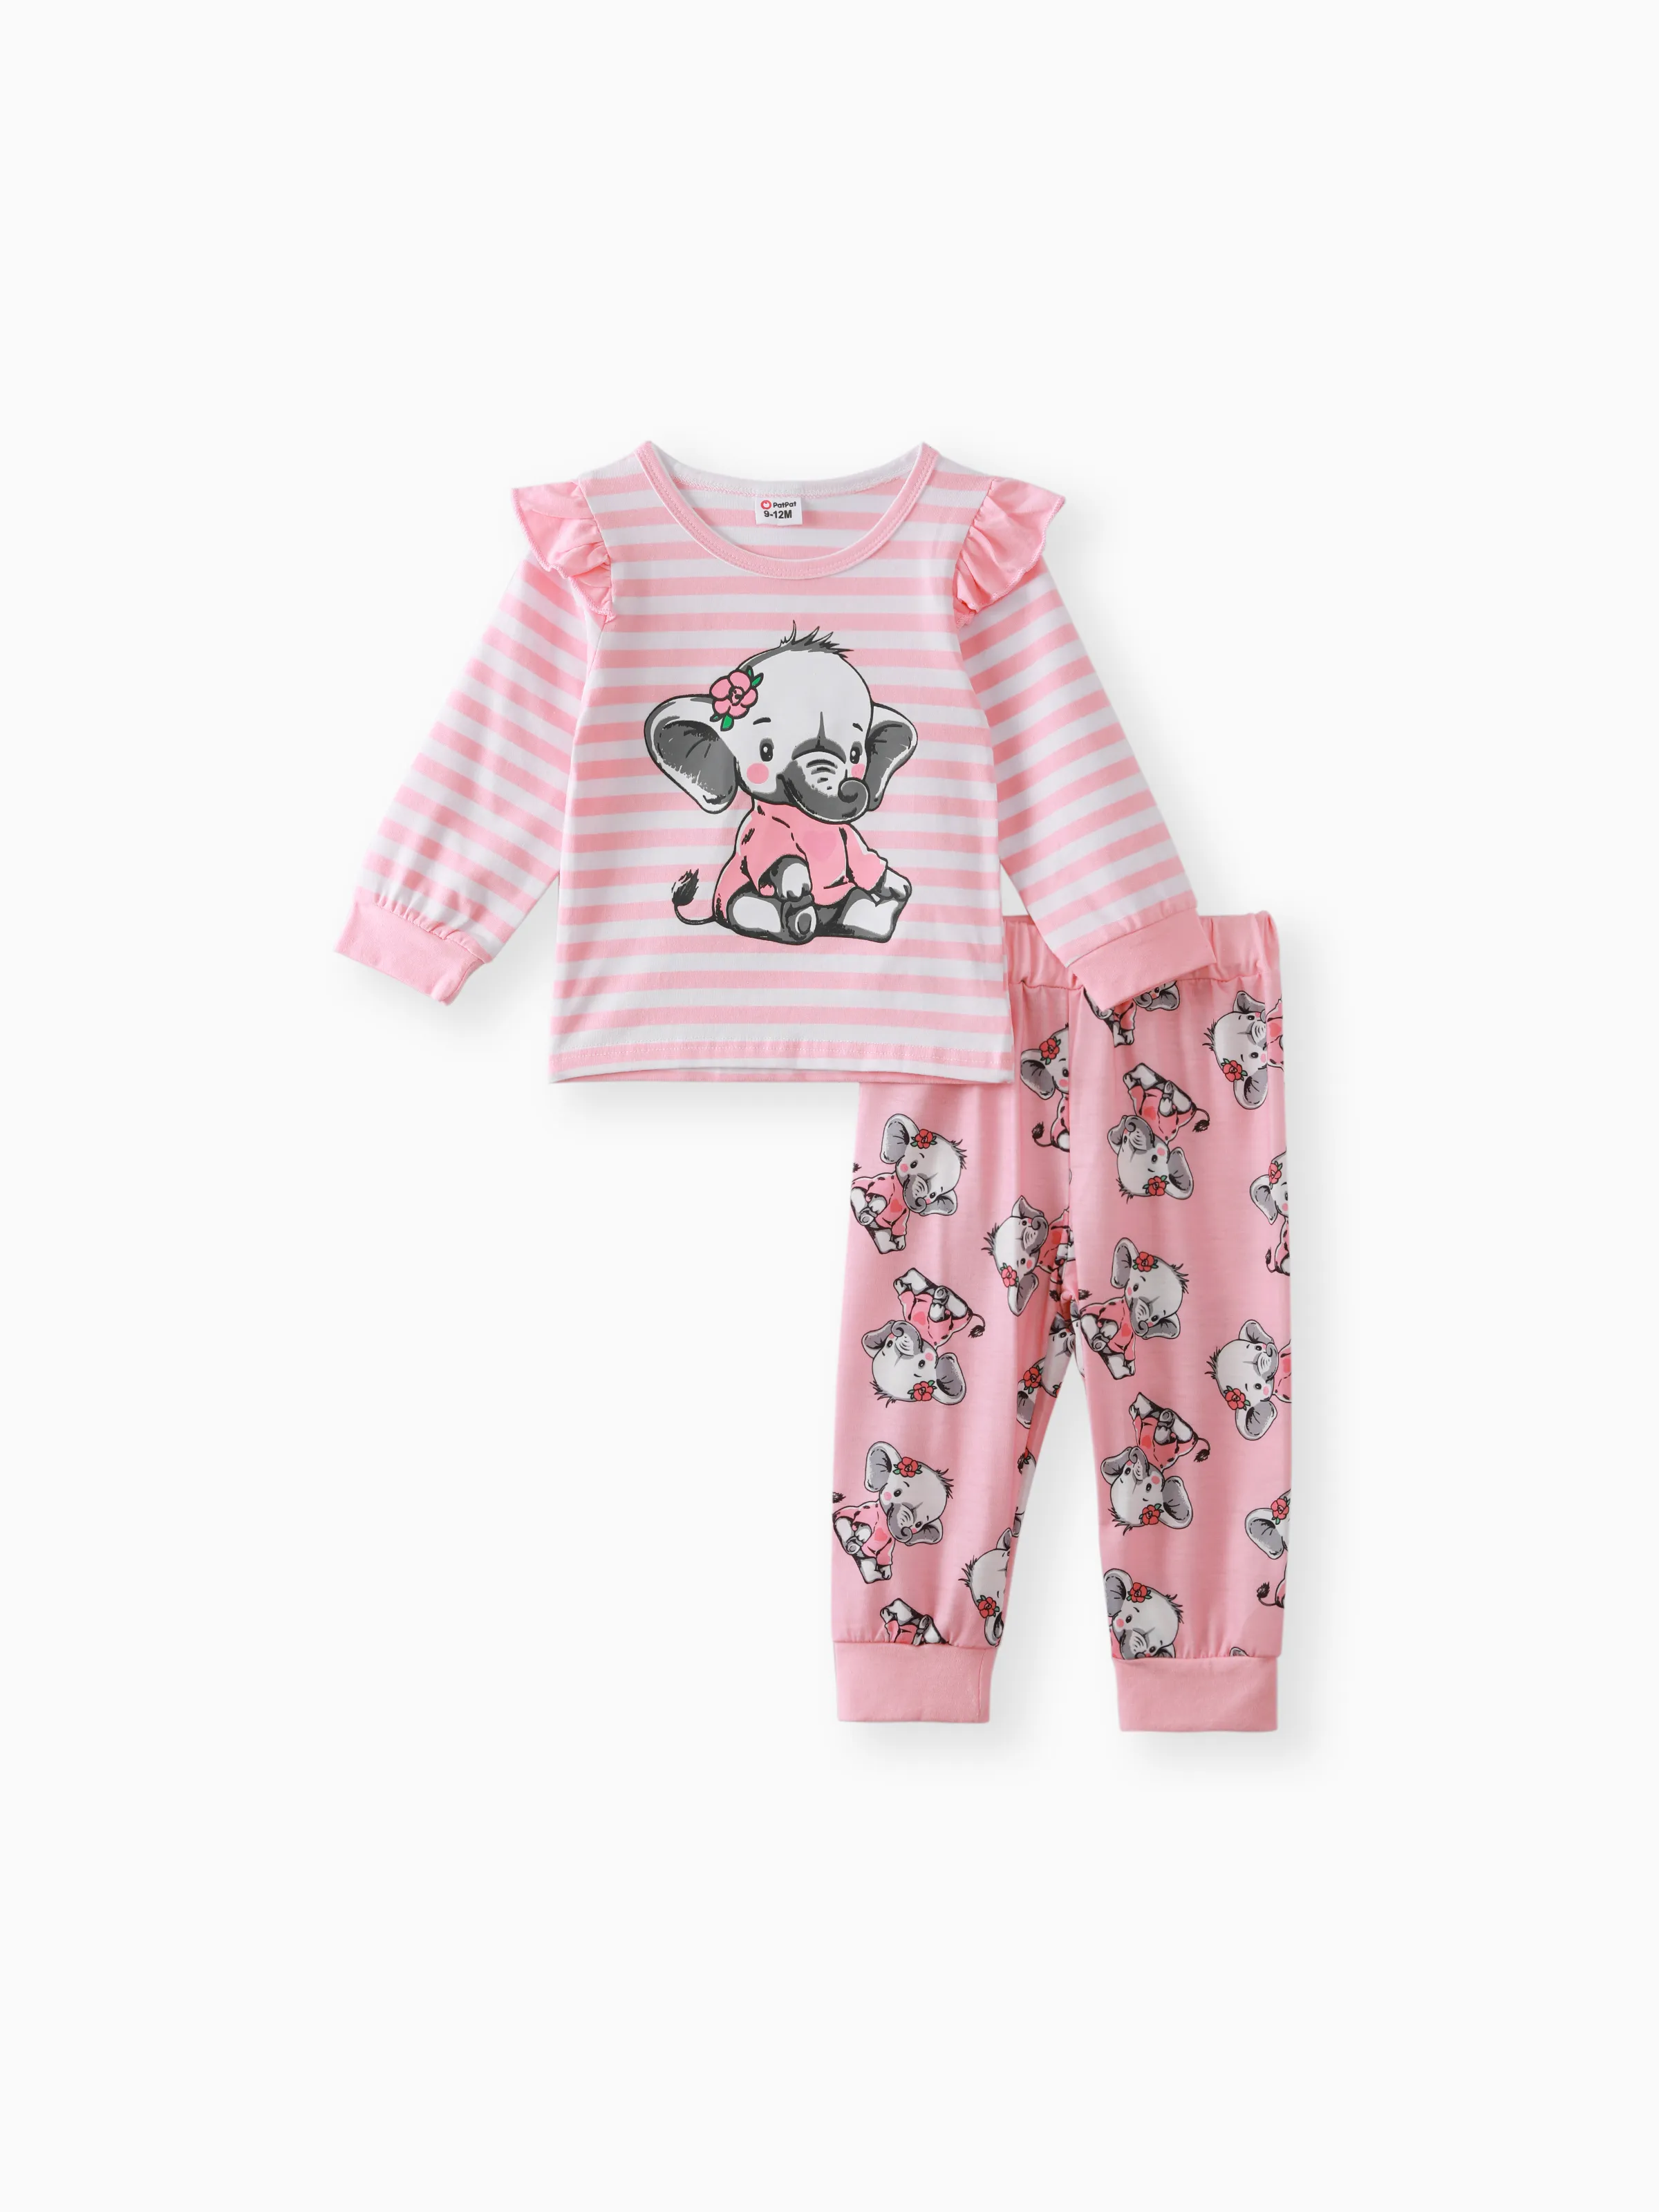 

2pcs Baby Girl 95% Cotton Long-sleeve Cartoon Elephant Print Grey Striped Top and Trousers Set